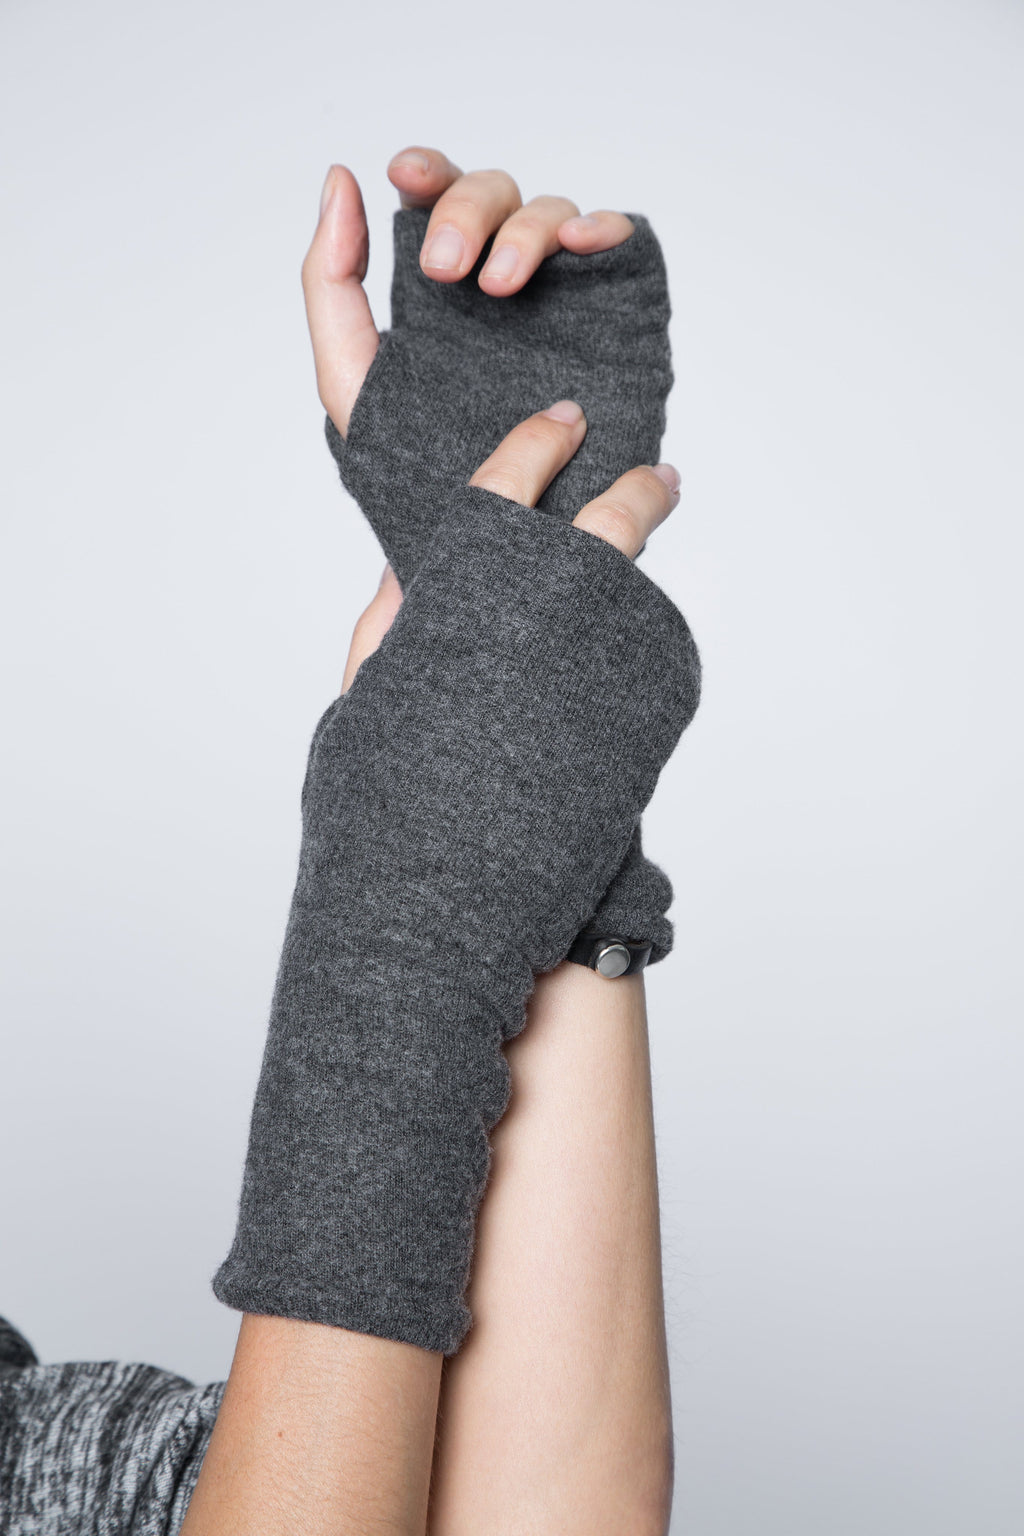 One size double layer fingerless glove in charcoal gray